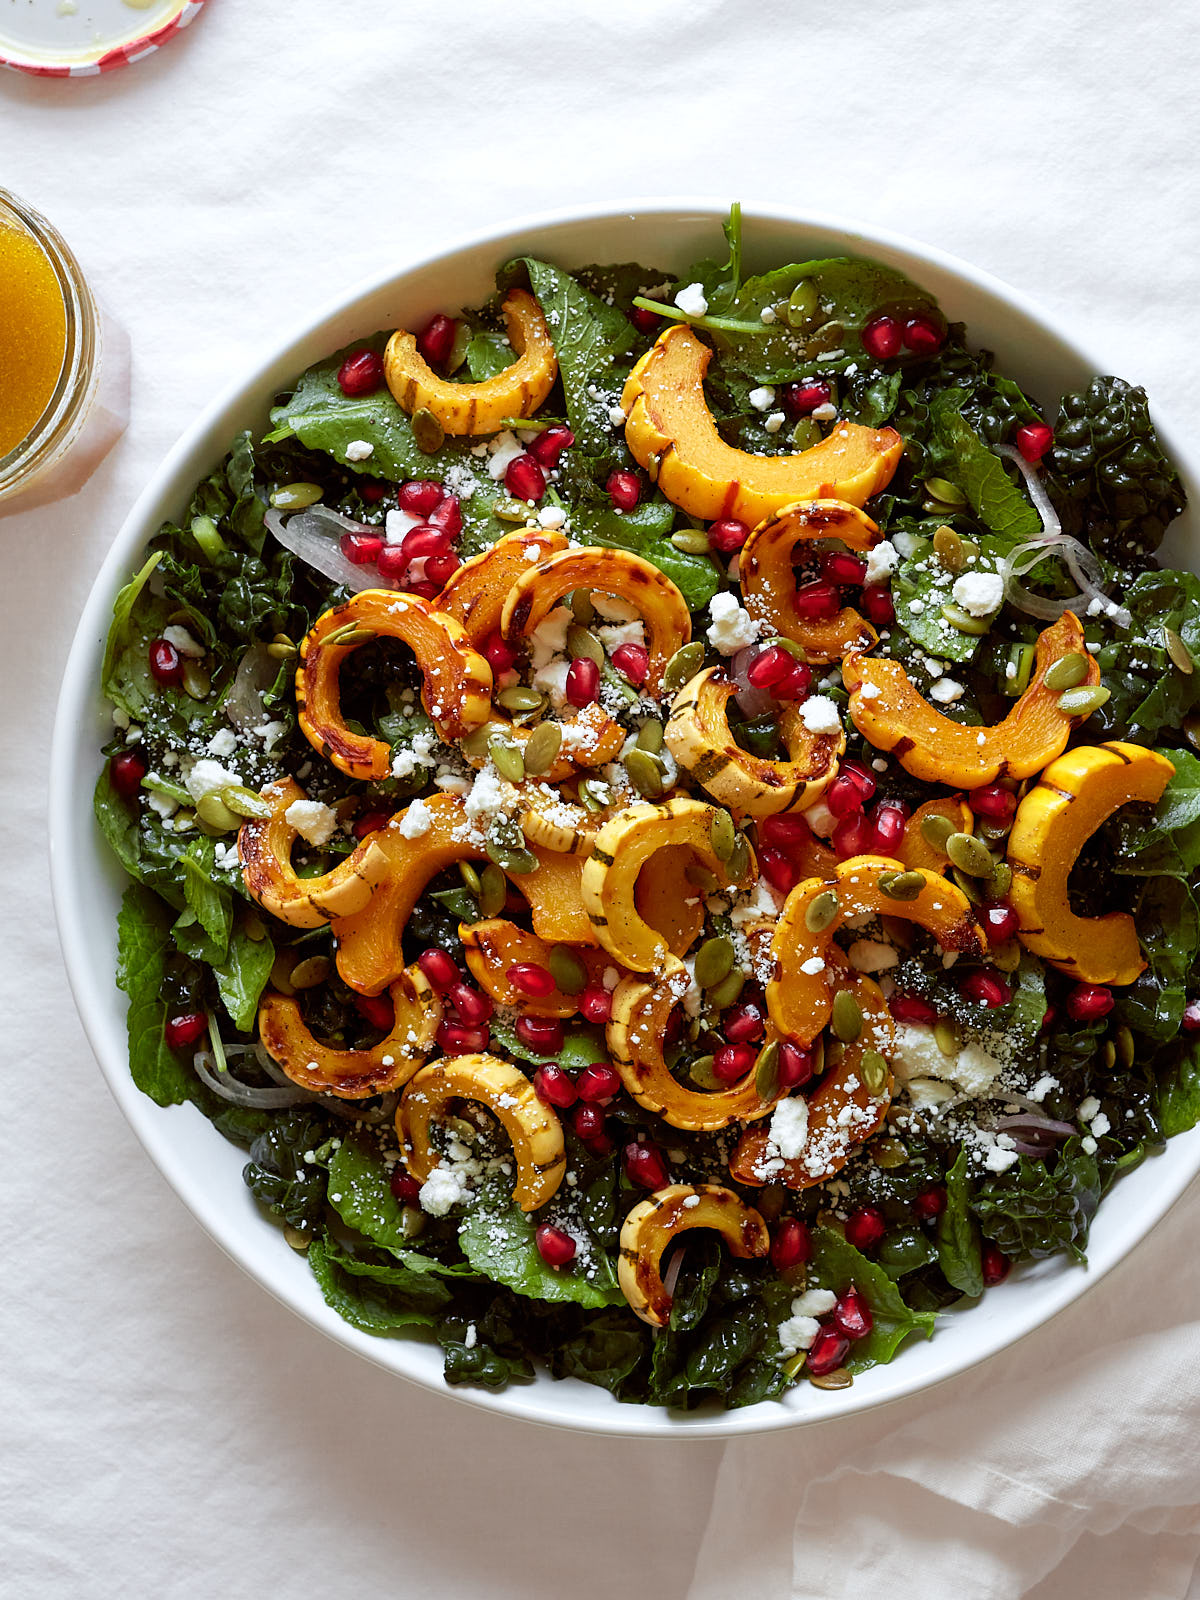 A roasted delicata squash and kale salad with goat cheese, pomegranate, pepitas, and shallots in a large white bowl on a white linen background.